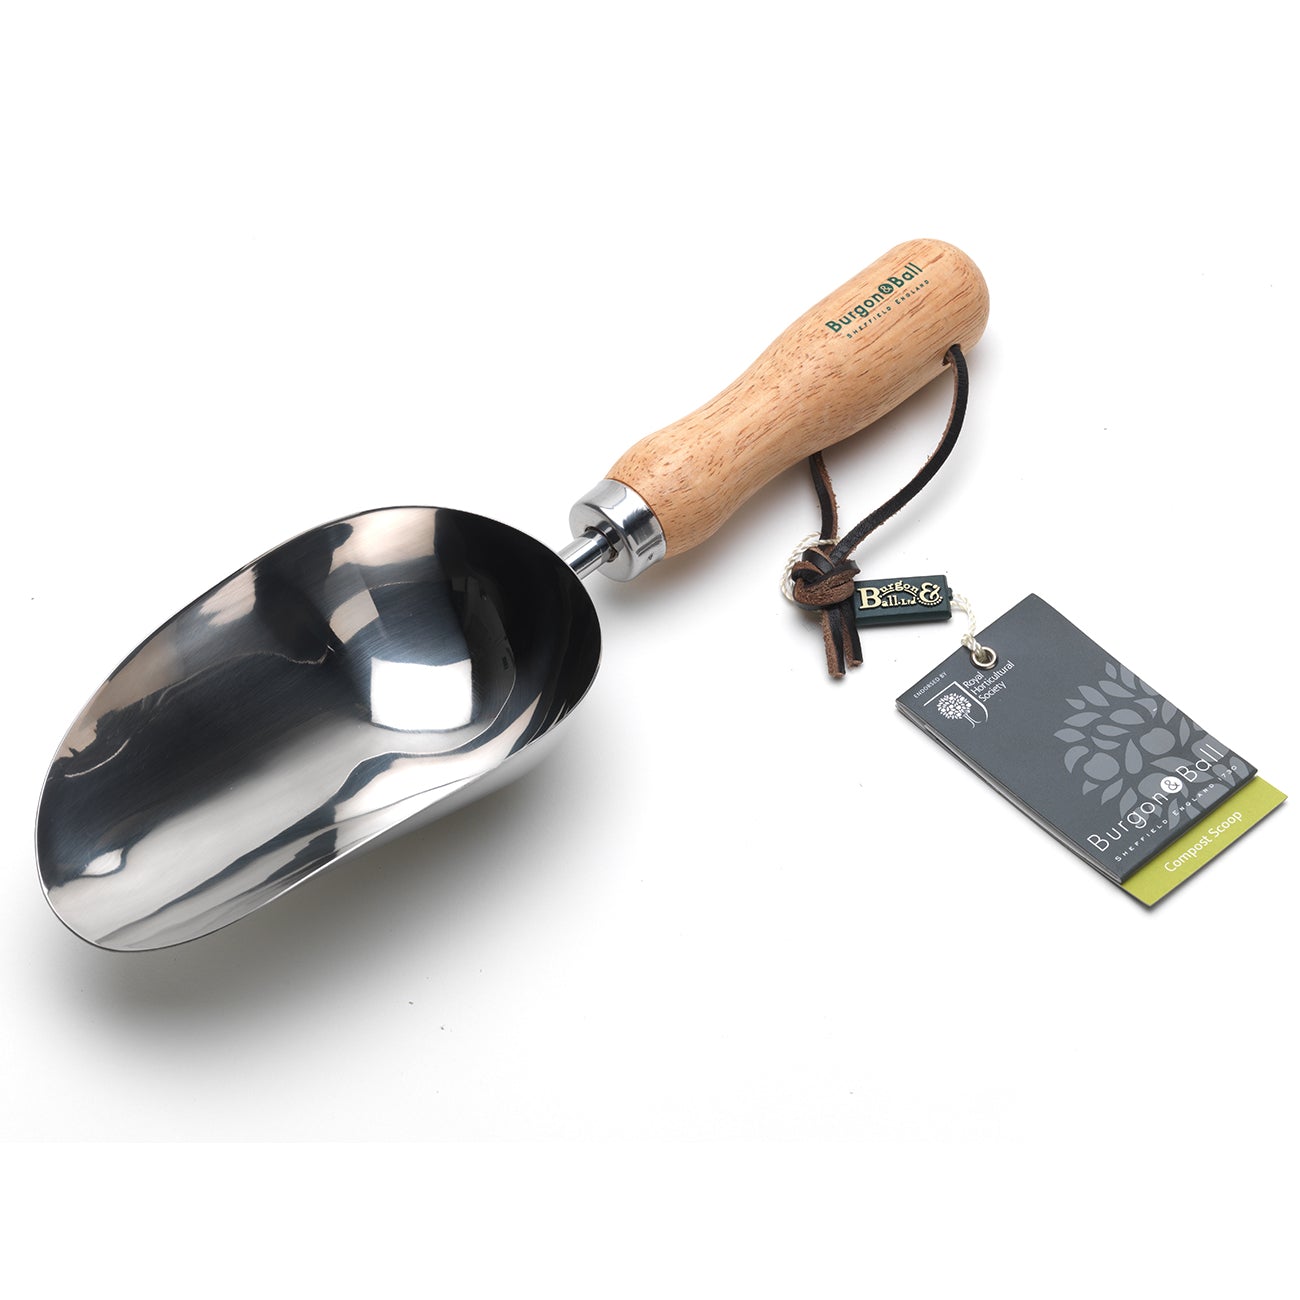 This stainless steel compost scoop is endorsed by the Royal Horticultural Society, perhaps the ultimate accolade in the gardening world.